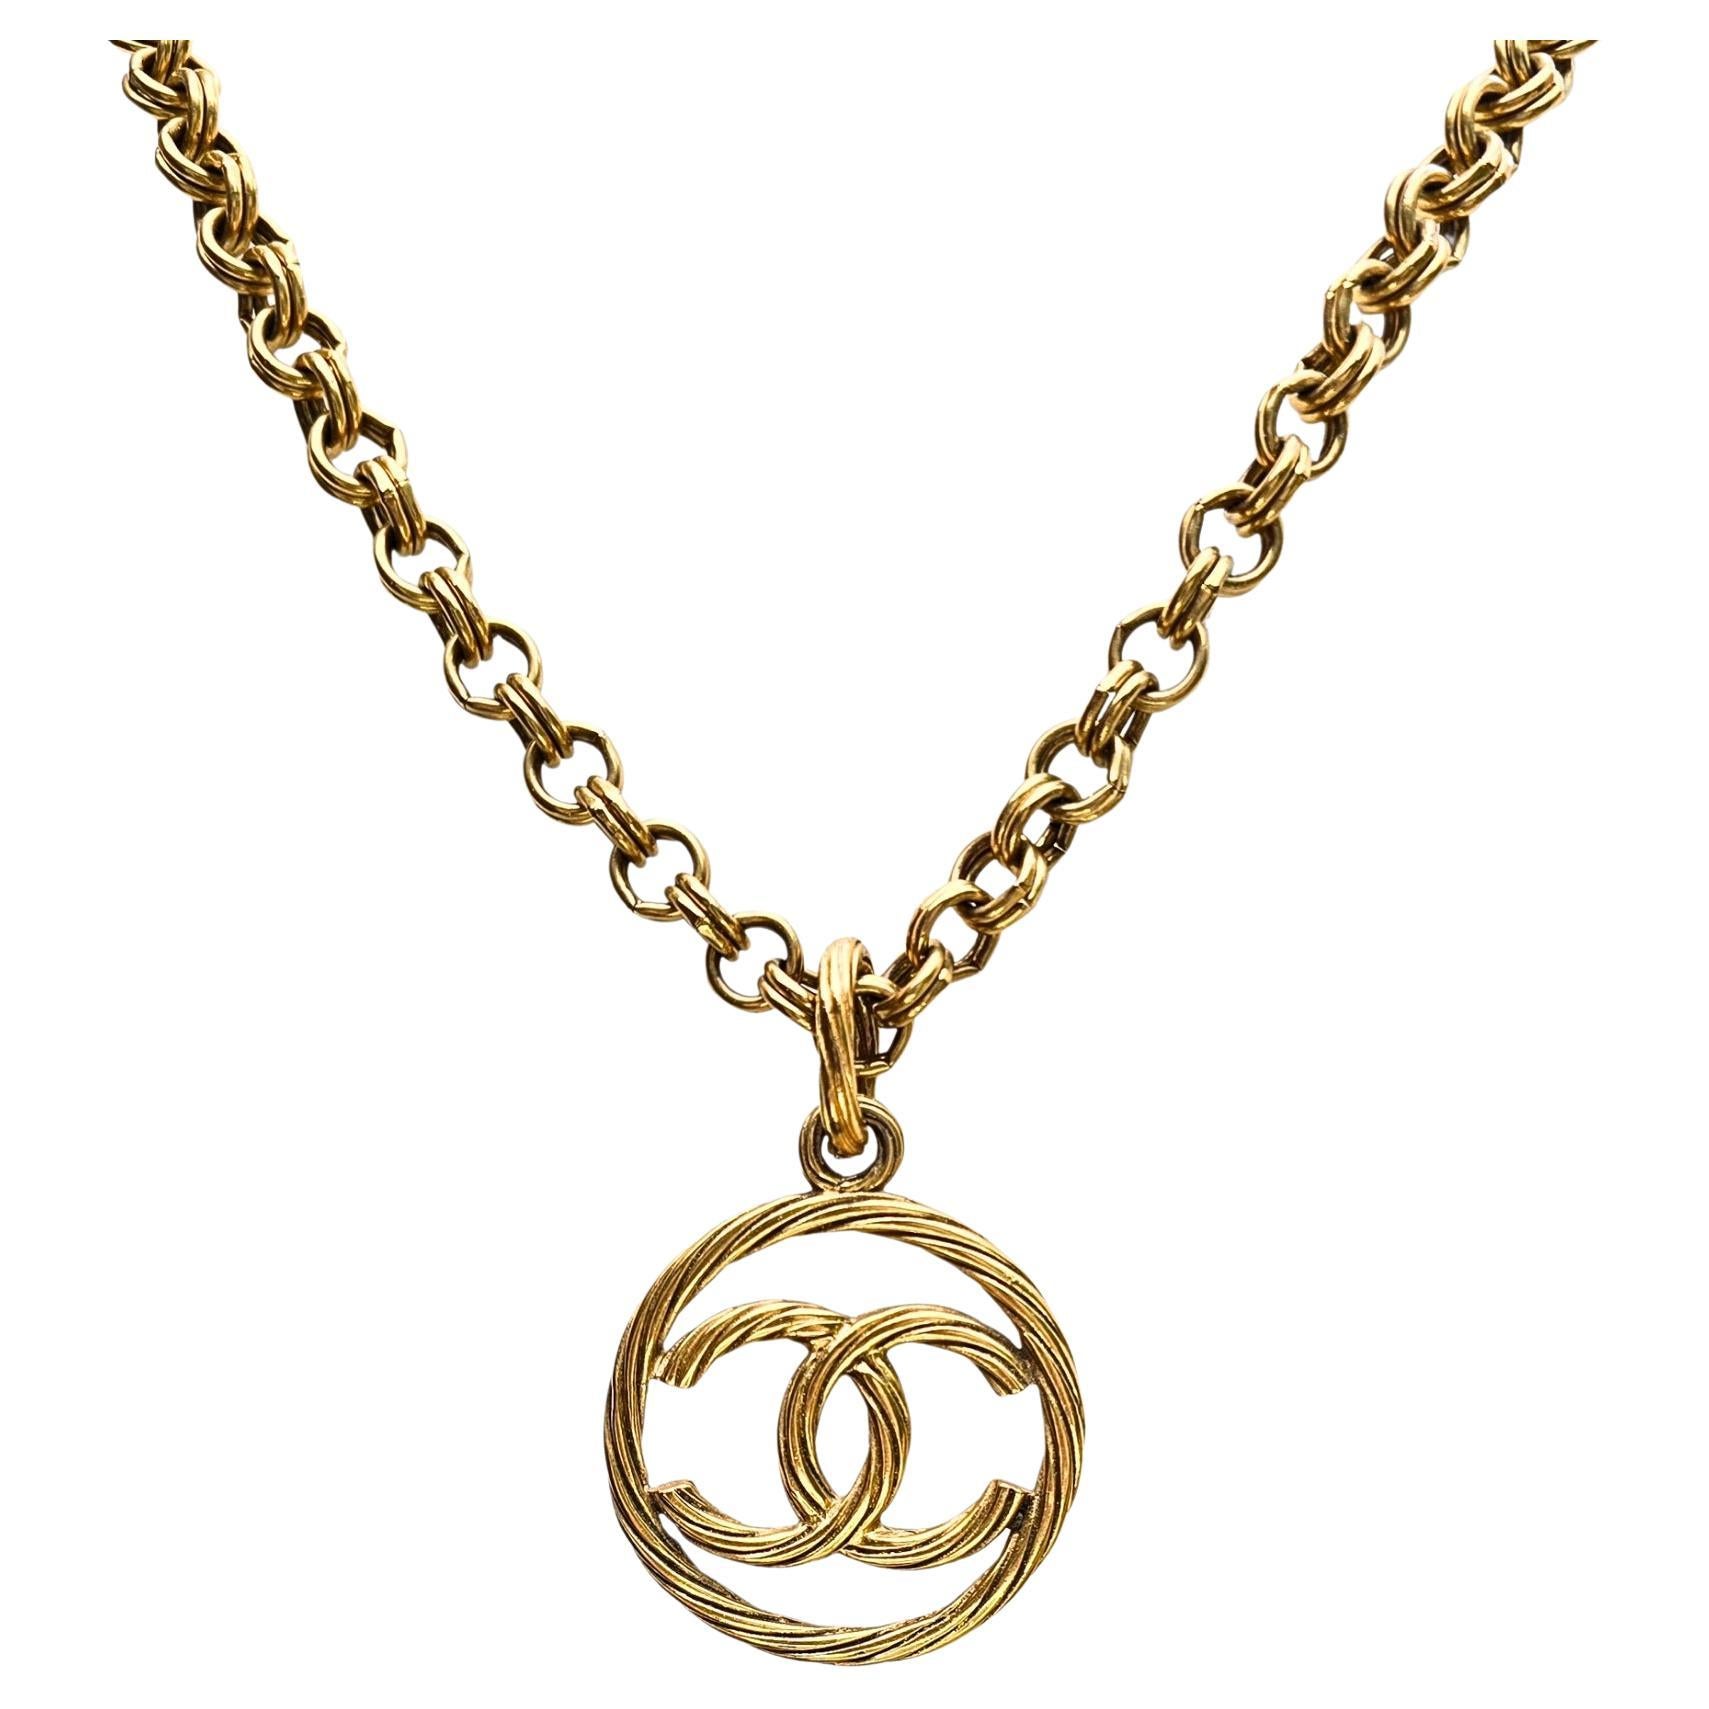 Vintage 1993 Chanel CC Medallion Long Chain Chunky Necklace 24K Gold Plated